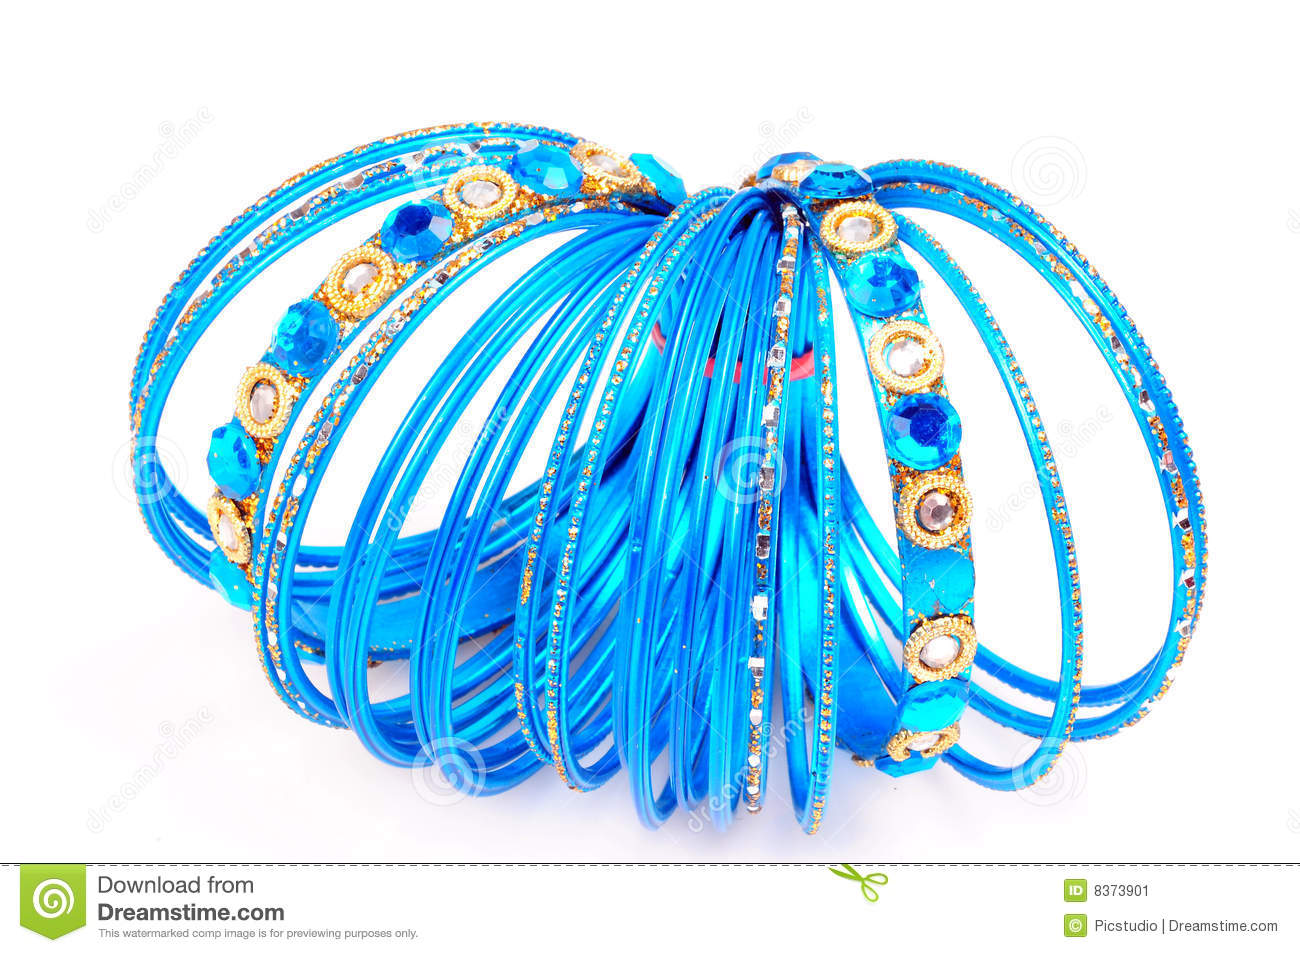 Bangles clipart 5 » Clipart Station.